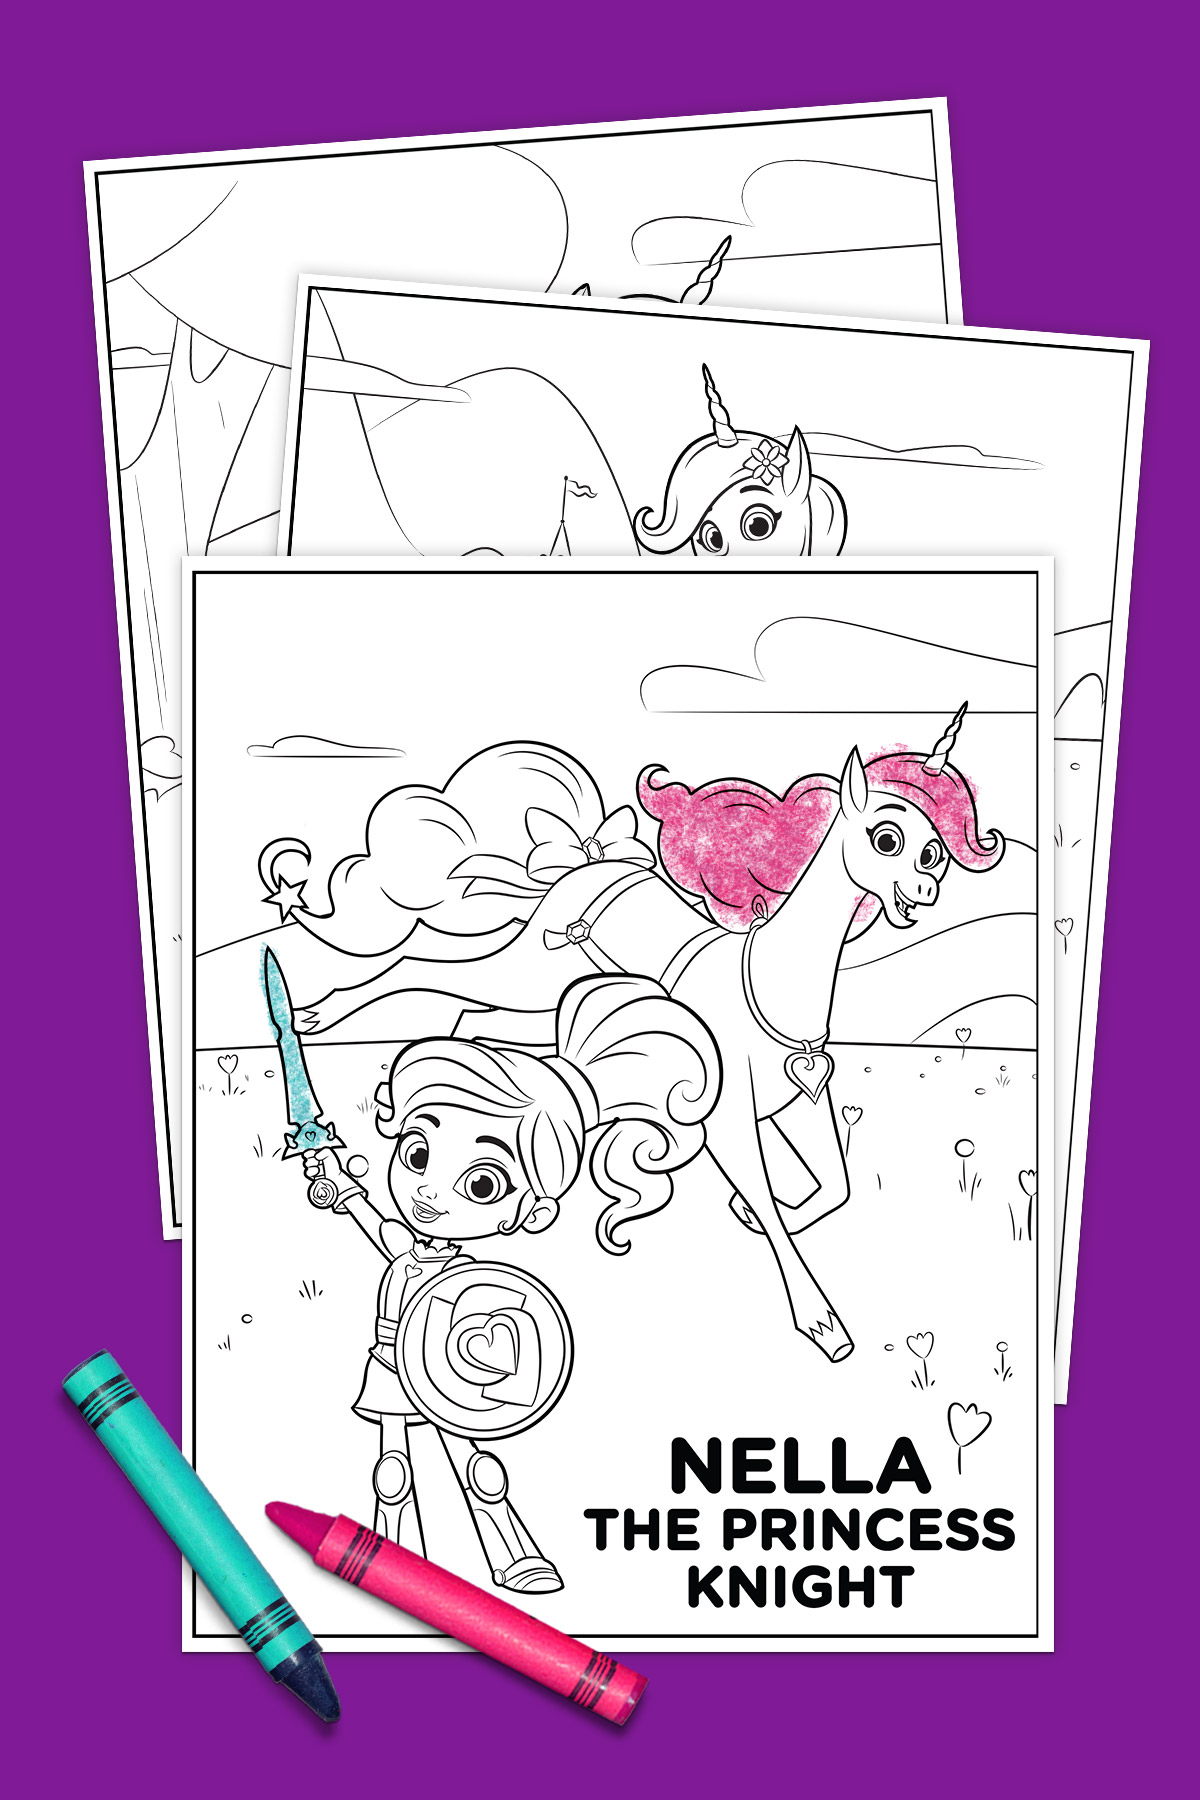 Nella the Princess Knight Coloring Pack   Nickelodeon Parents